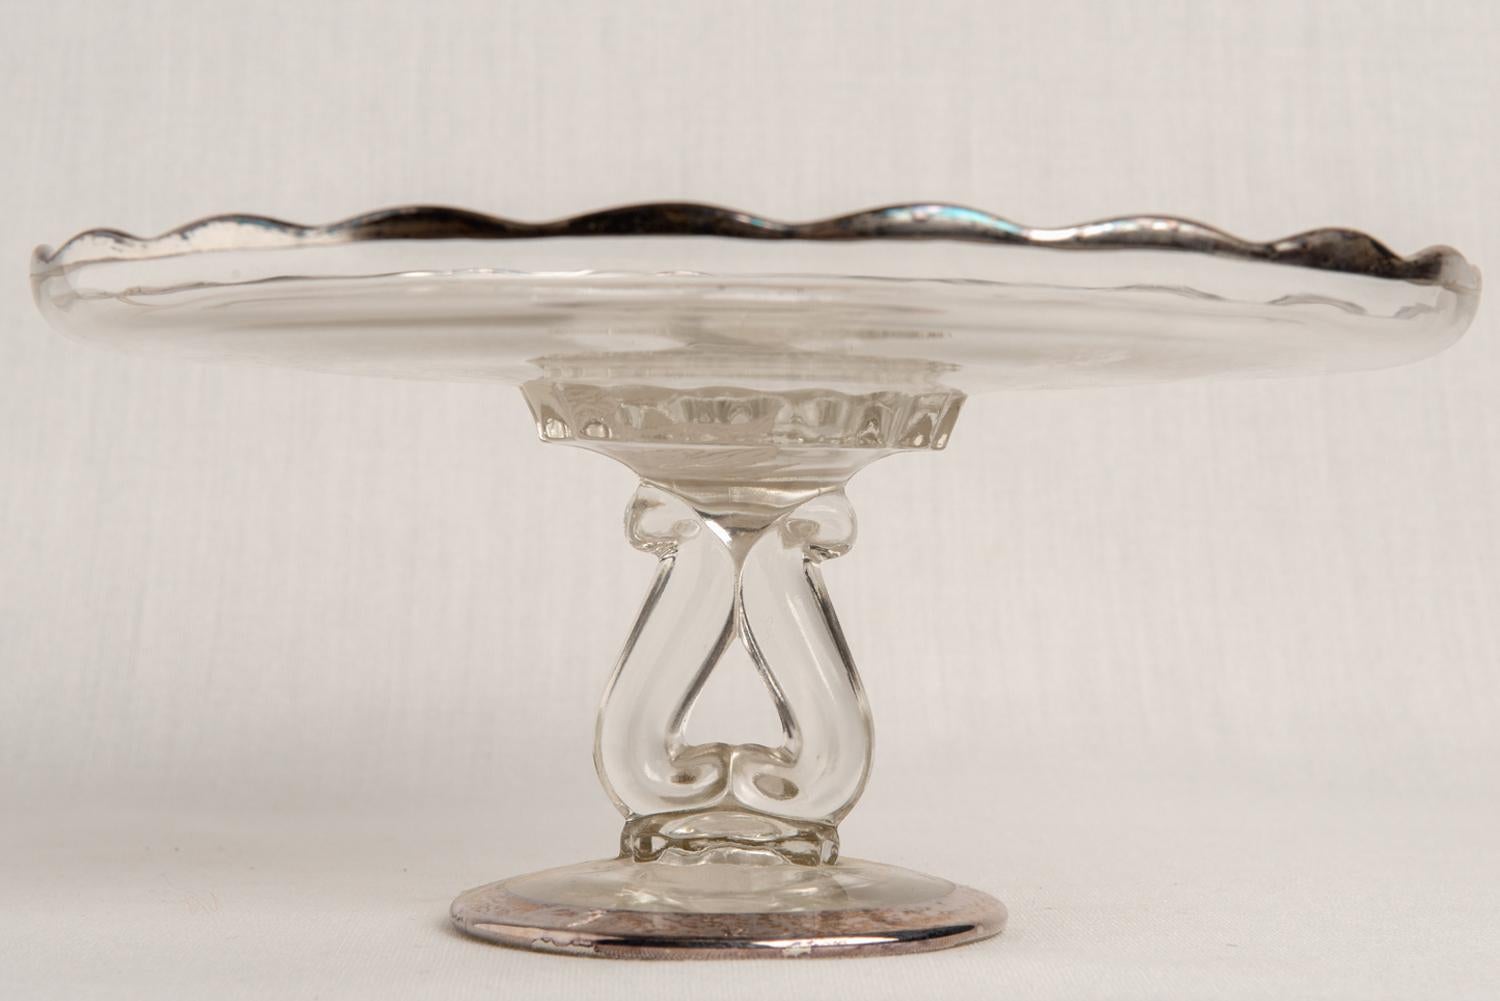 Elegant patisserie stand with flowers printed in silver on the glass: named 